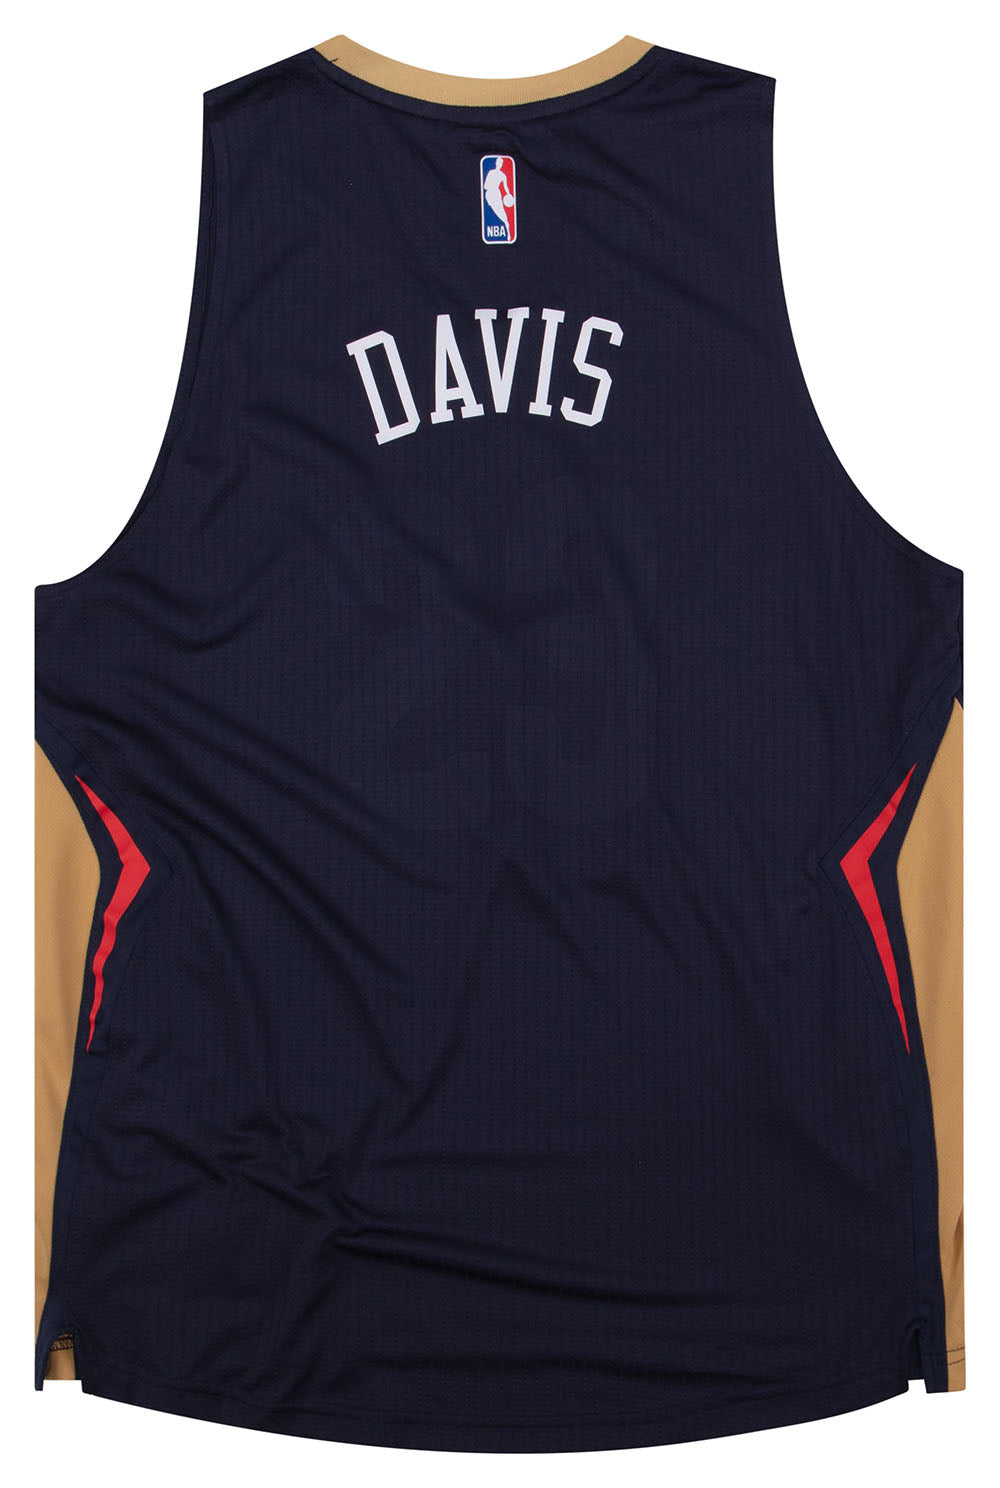 New Orleans Pelicans NBA Jersey – ASAP Vintage Clothing